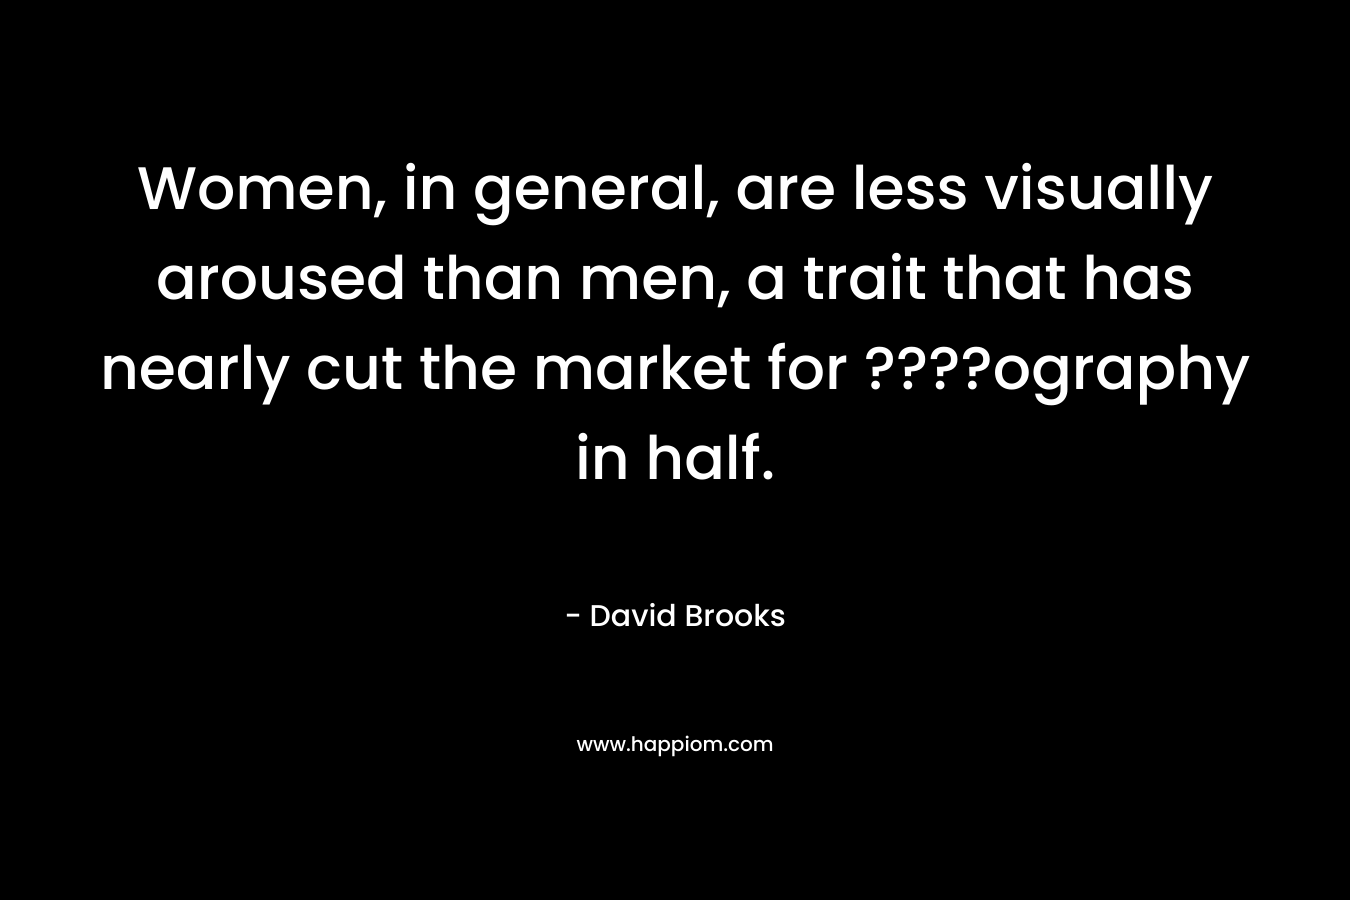 Women, in general, are less visually aroused than men, a trait that has nearly cut the market for ????ography in half. – David Brooks